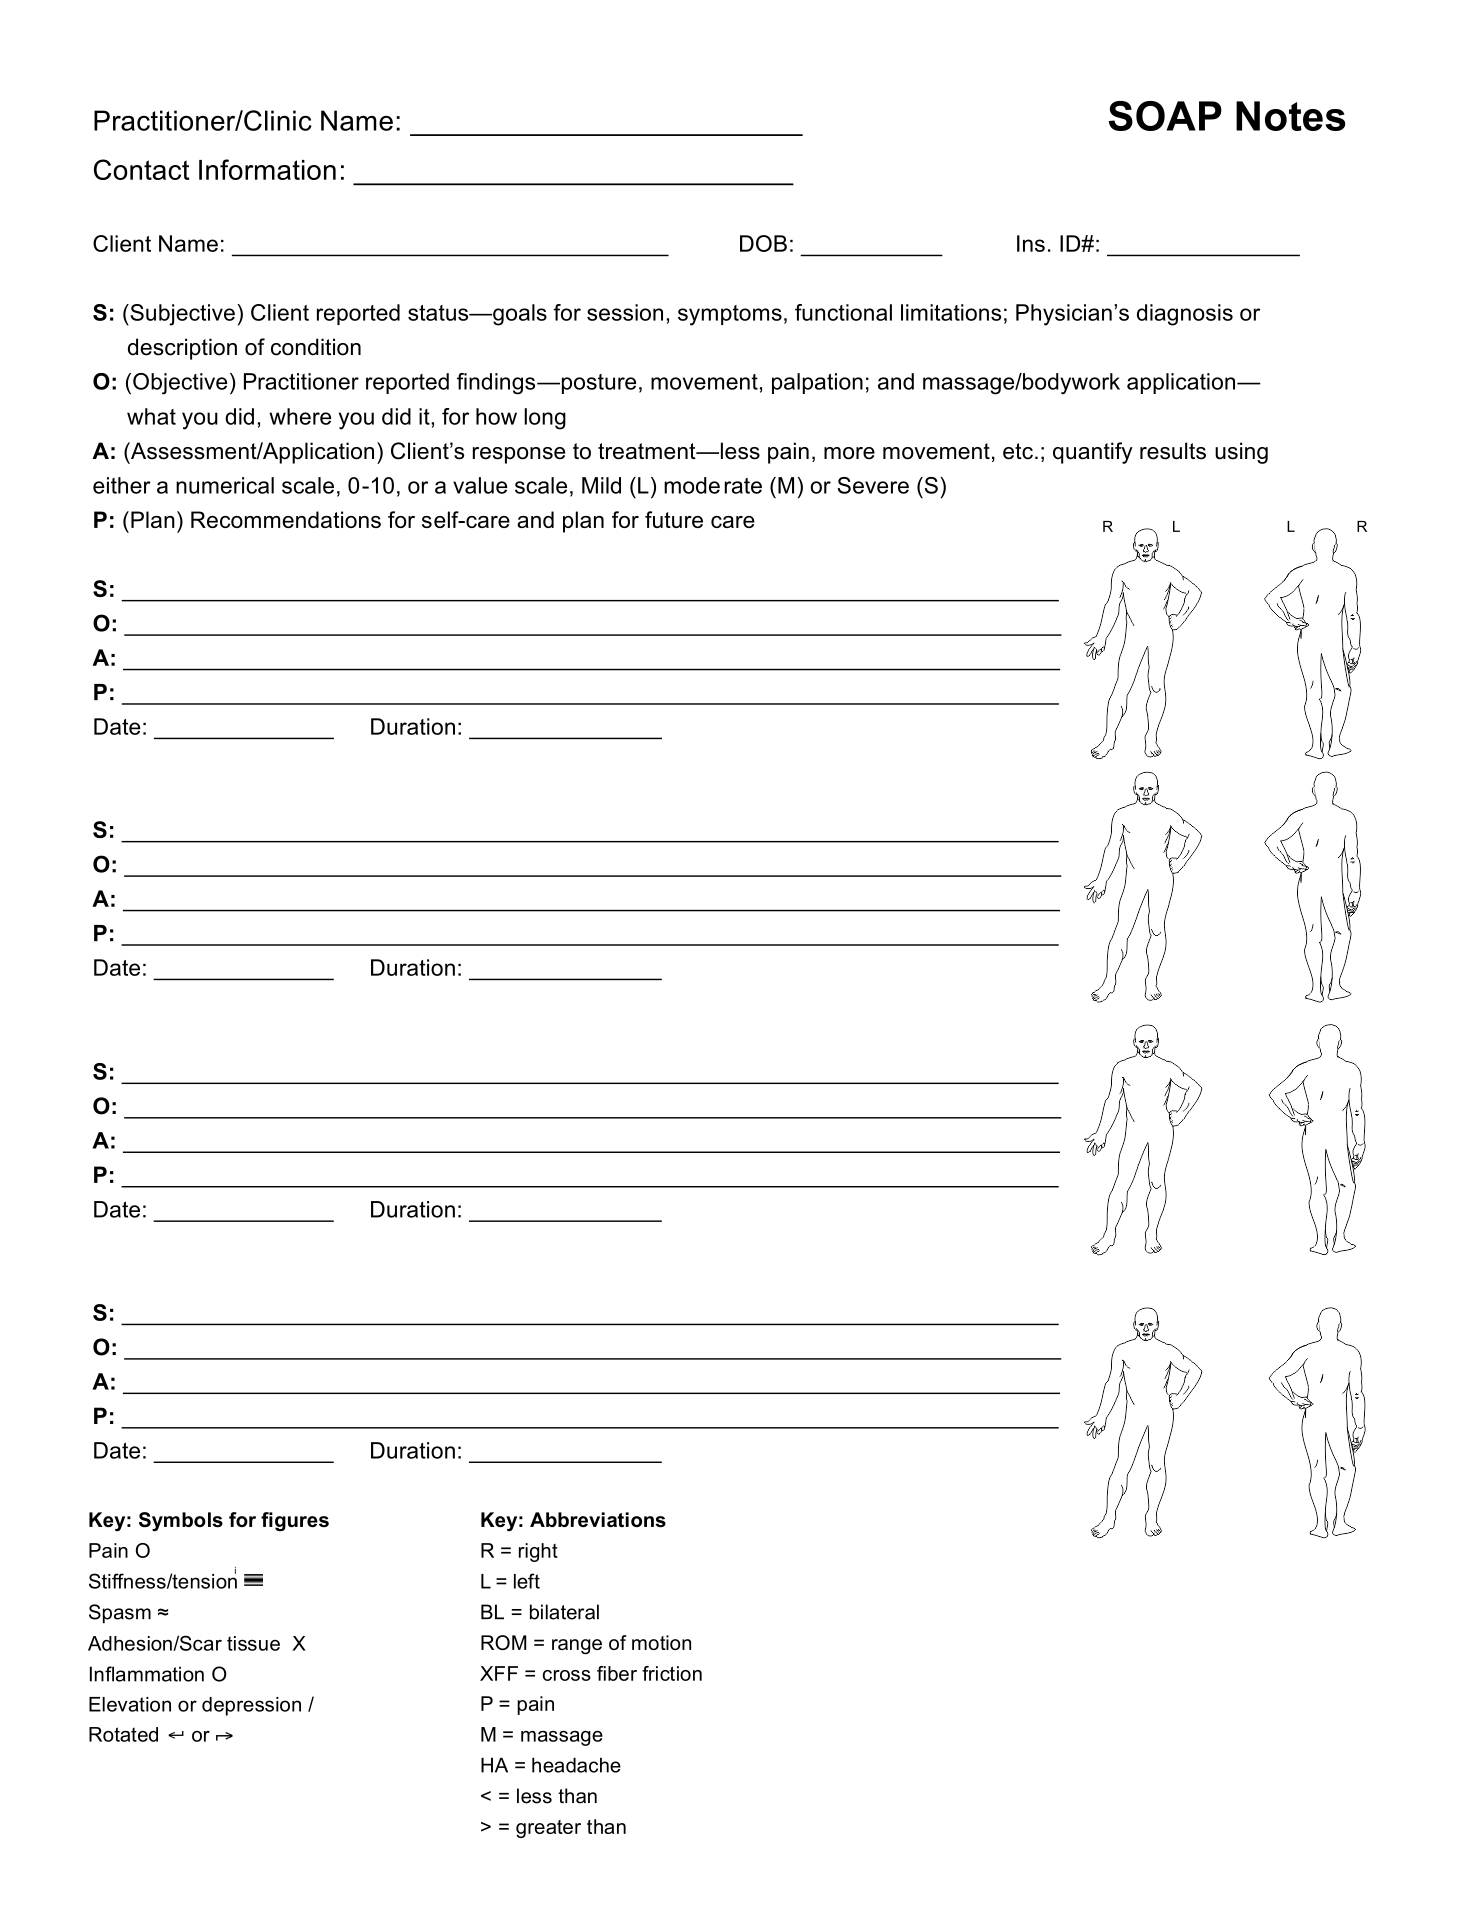 Massage Therapy Soap Notes Template